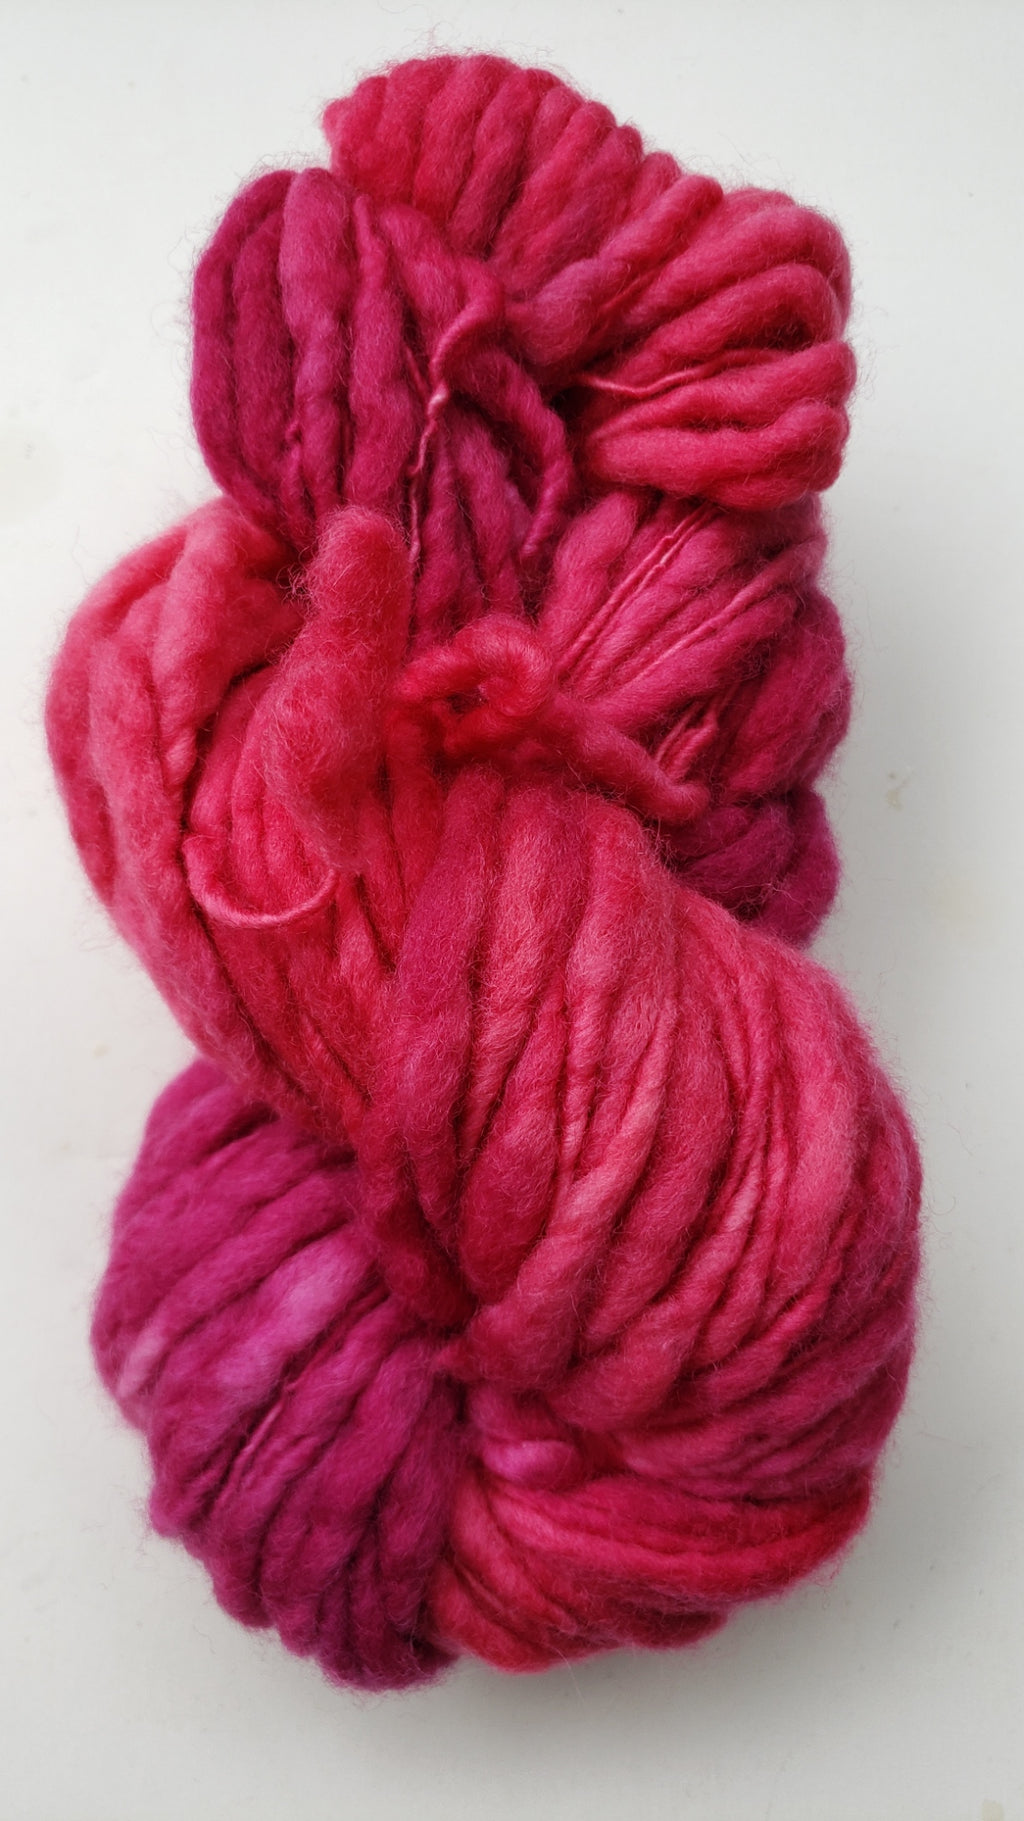 Slubby - PINK PEONY -  Merino/Blue Face Leicester - Hand Dyed Textured Yarn Thick and Thin